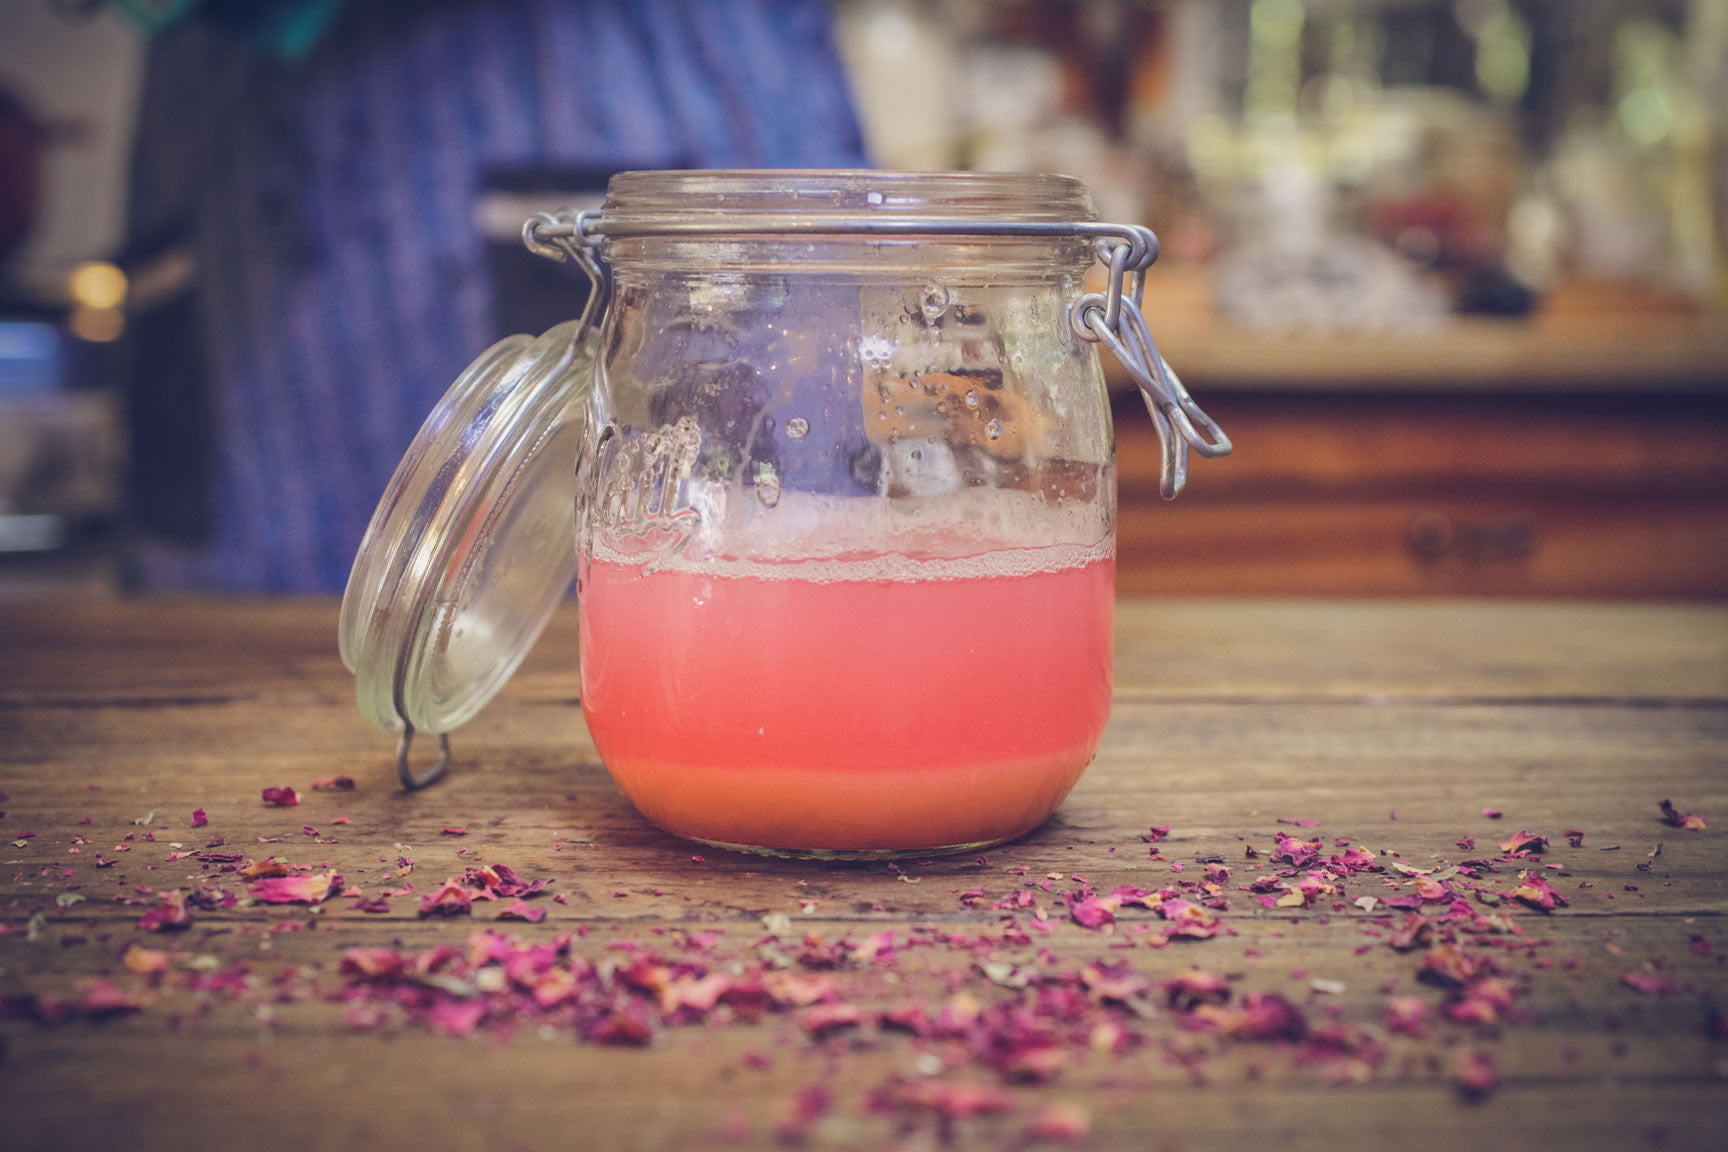 strained syrup rose